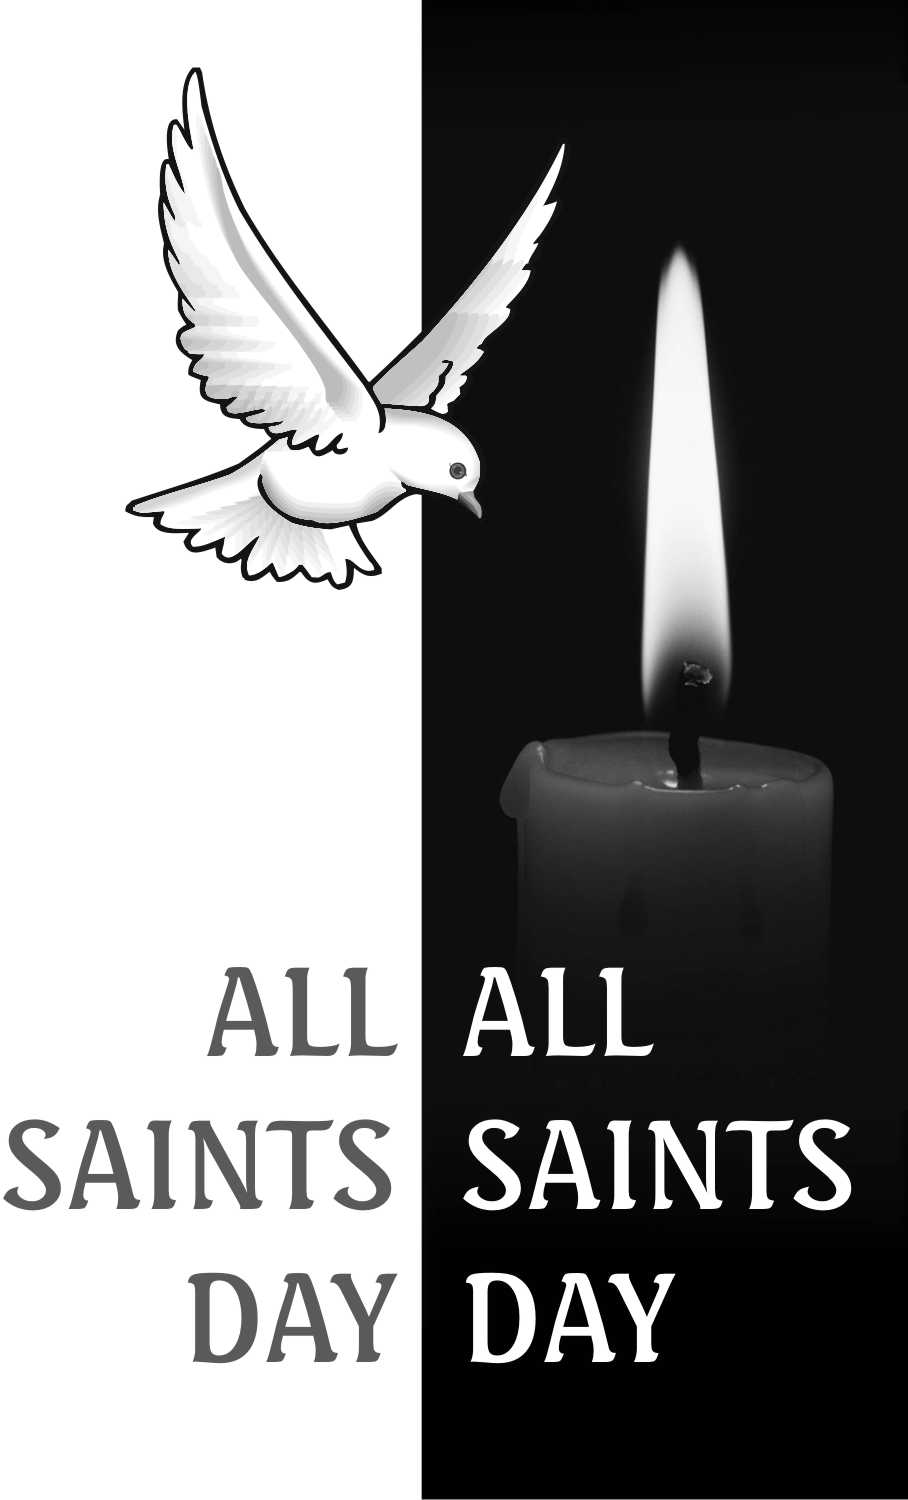 all saints day - Clip Art Library